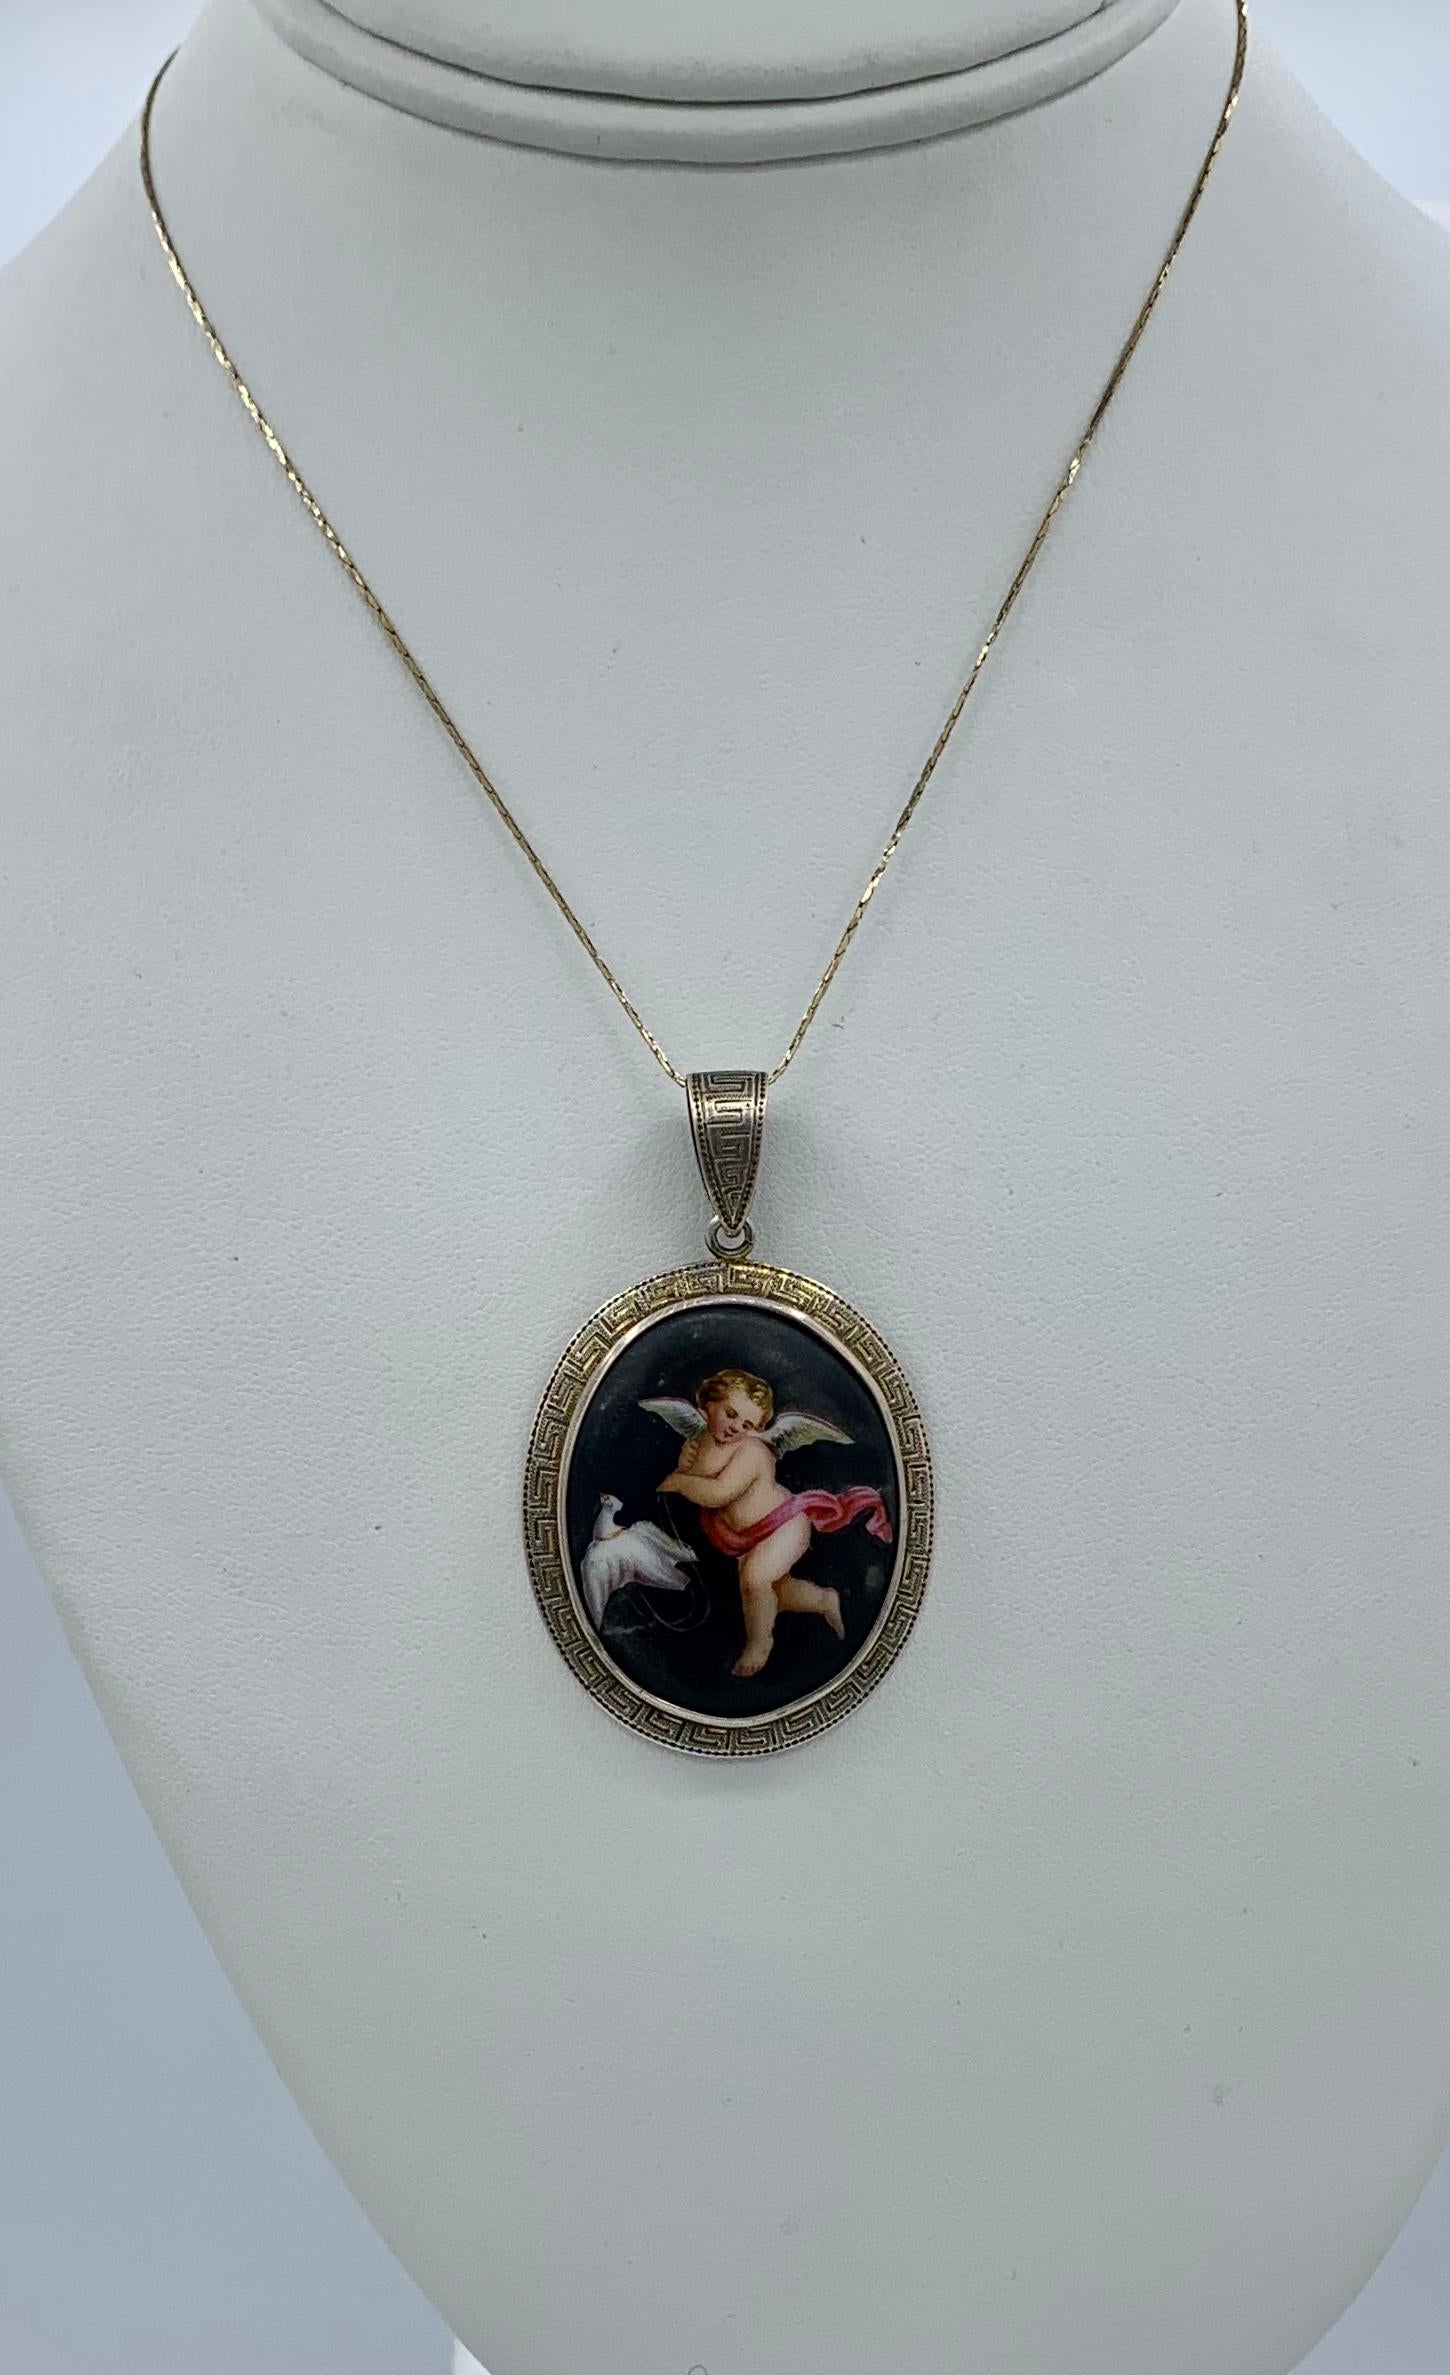 This is a very rare and wonderful Victorian pendant with a hand painted image of a Winged Cherub or Angel with a dove bird on a string set in a Greek Key motif setting in 9 Karat Rose Gold.  The romantic and charming image is beautifully hand